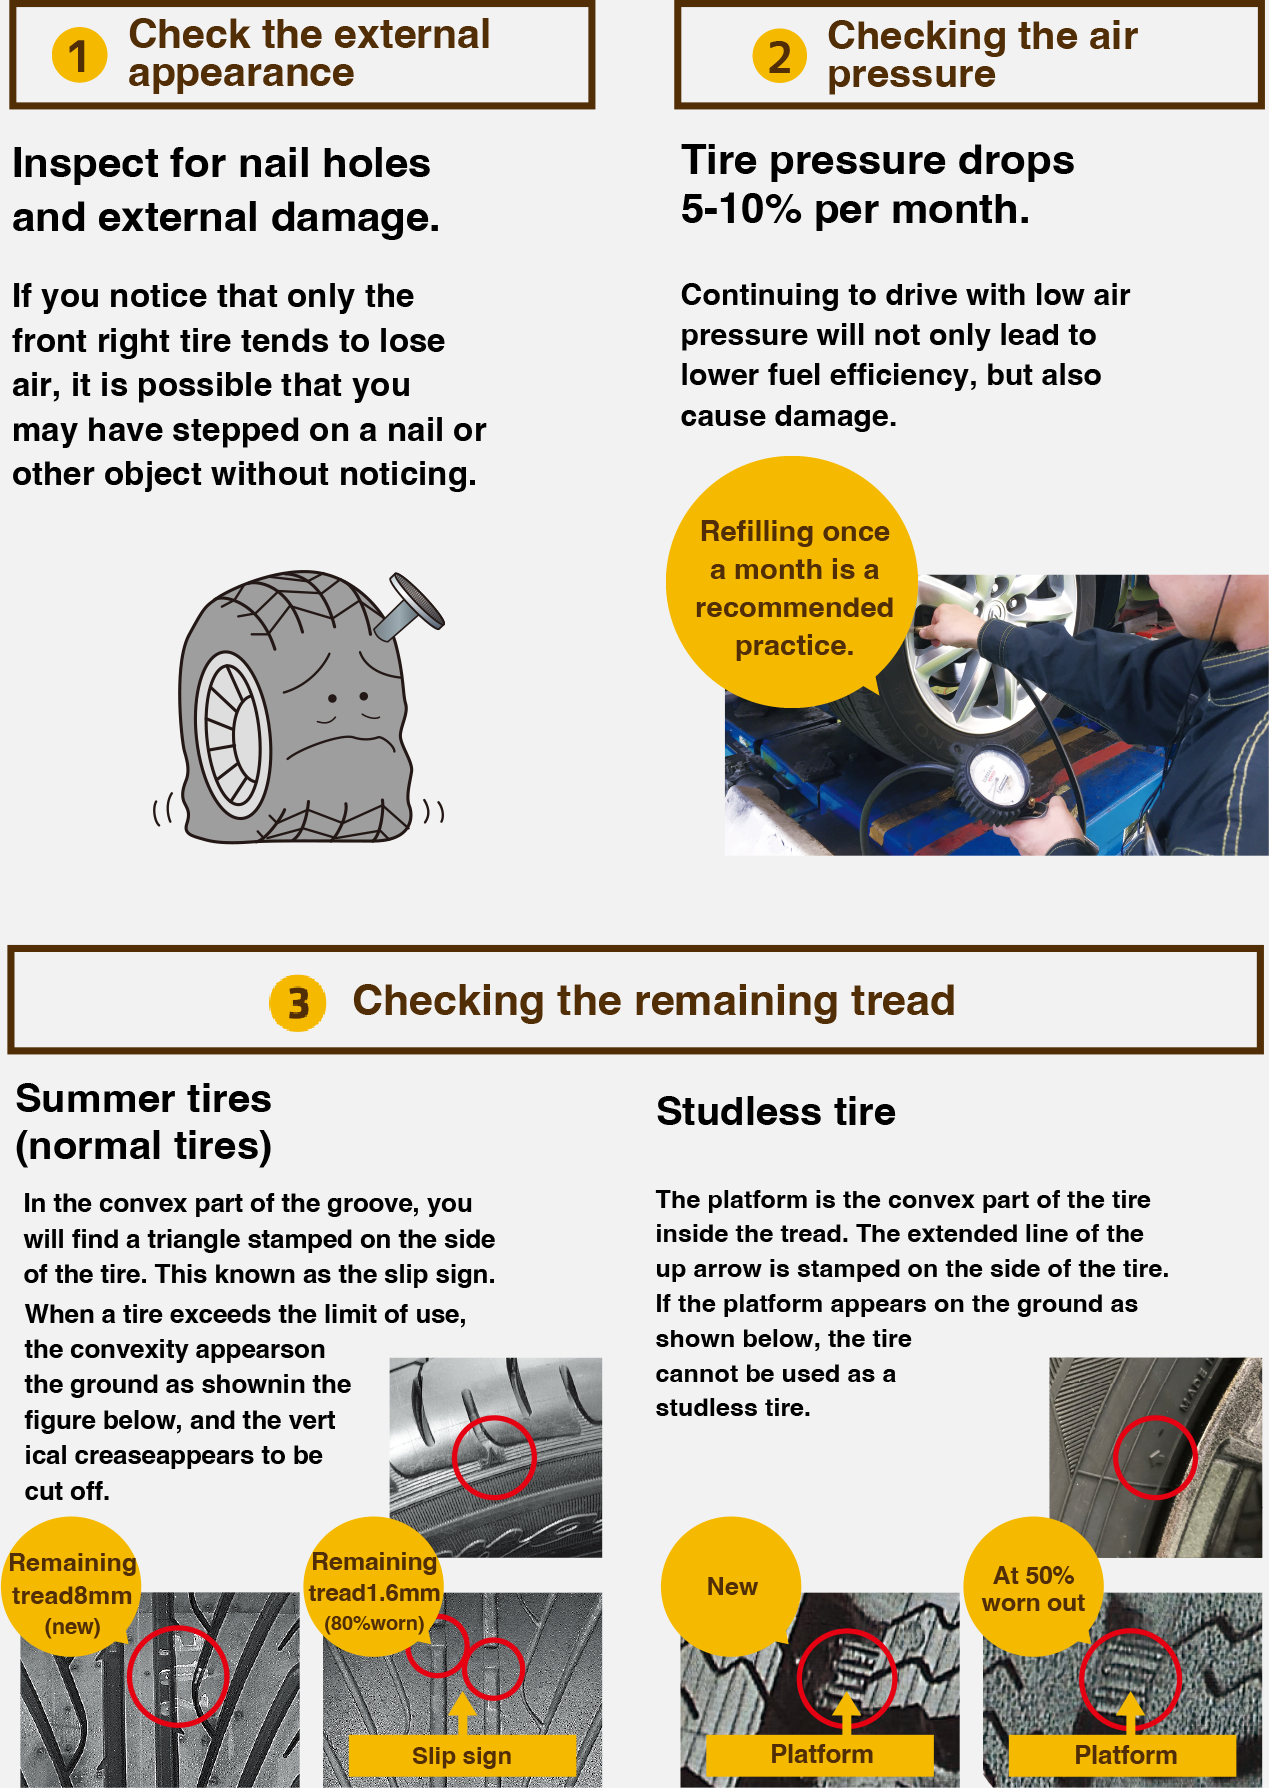 (1) Check the external appearance (2) Checking the air pressure (3) Checking the remaining tread